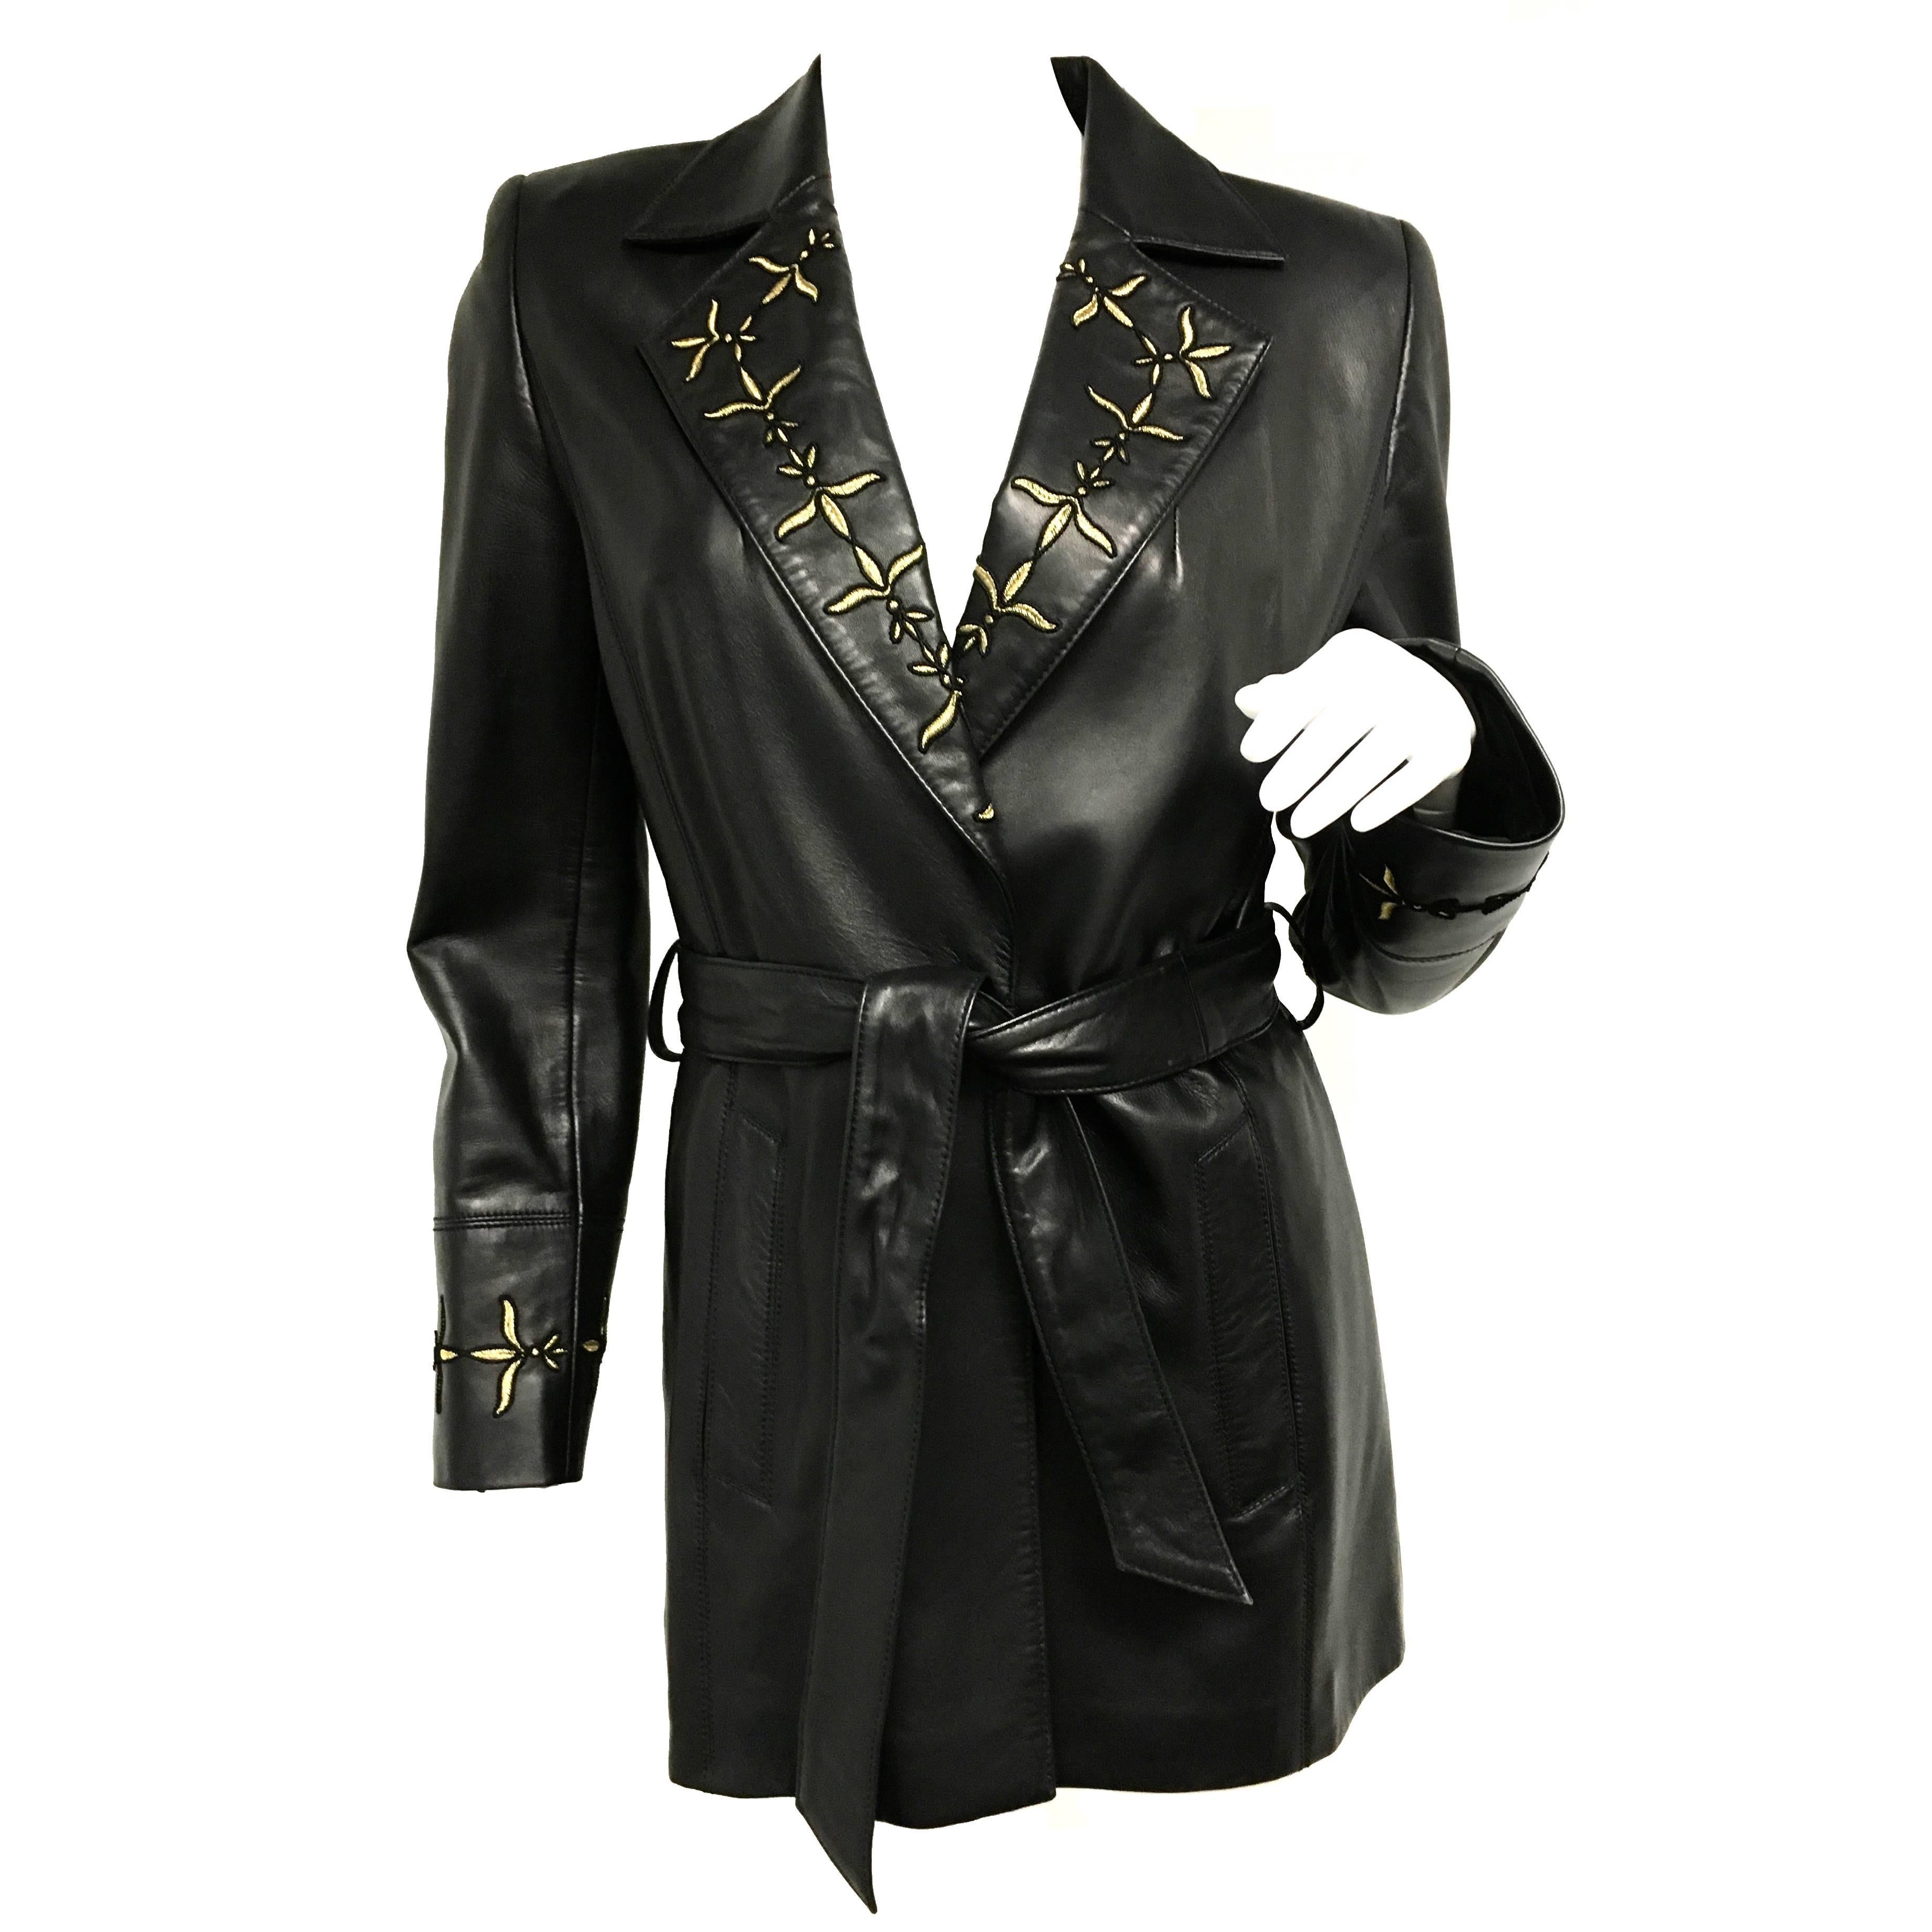 Escada Black Gold Embroidered Leather Belted Jacket New